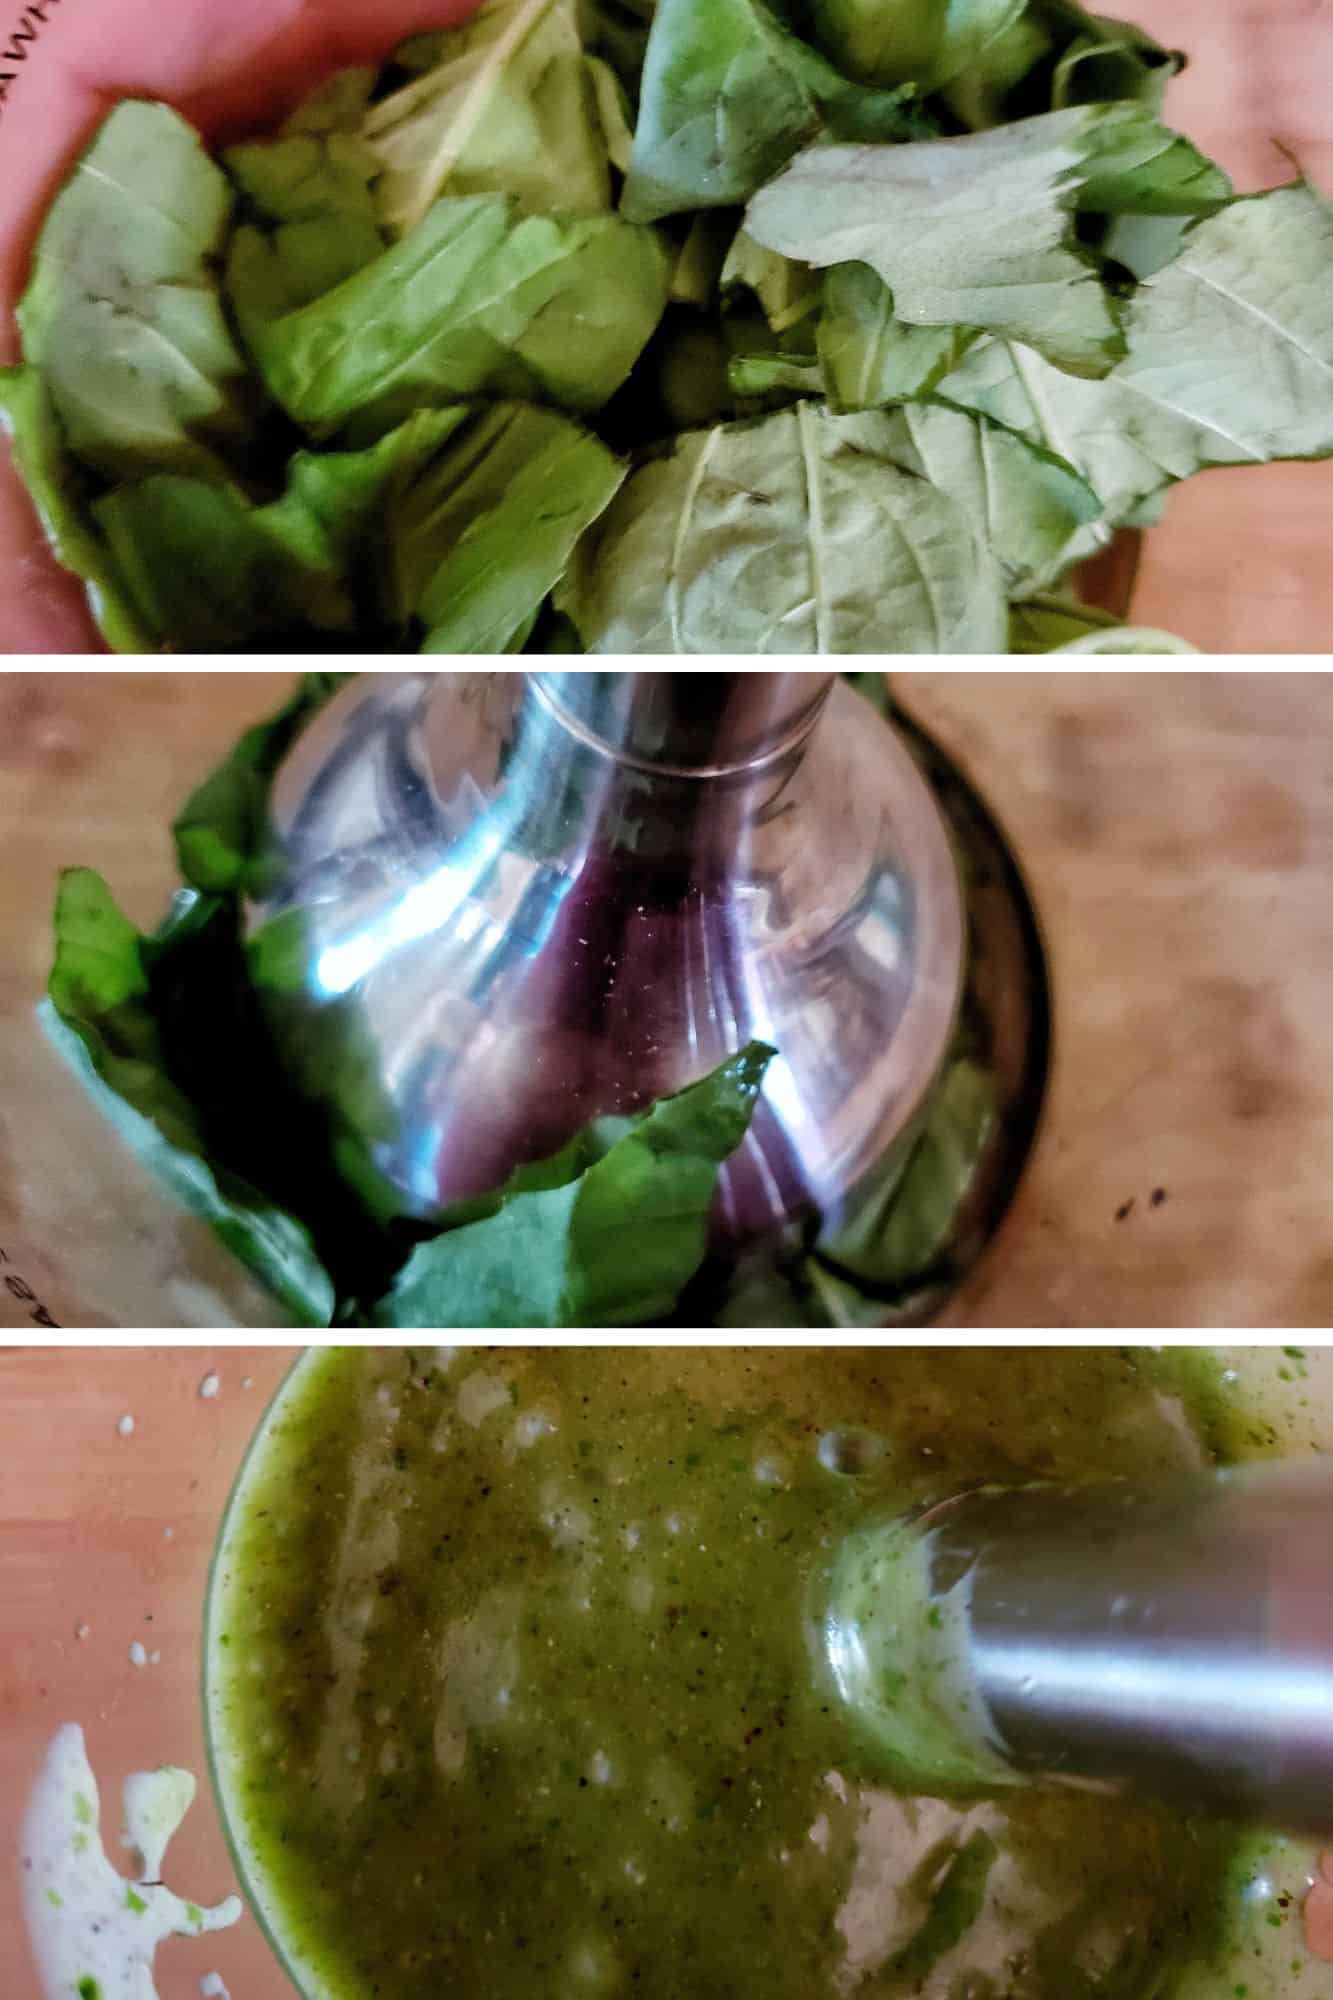 photos showing the vinaigrette being blended